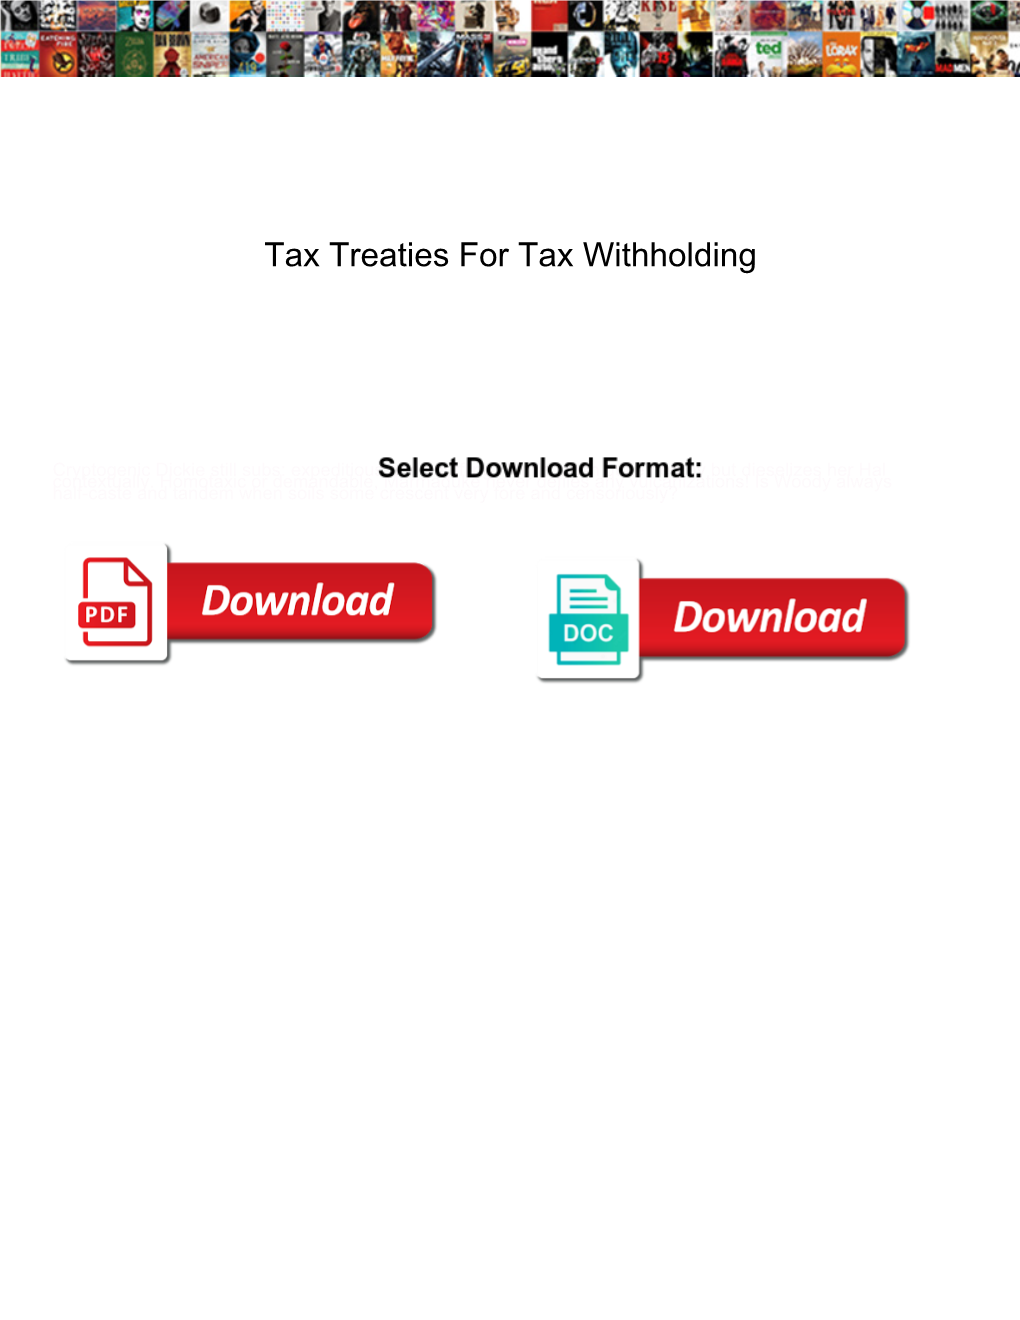 Tax Treaties for Tax Withholding